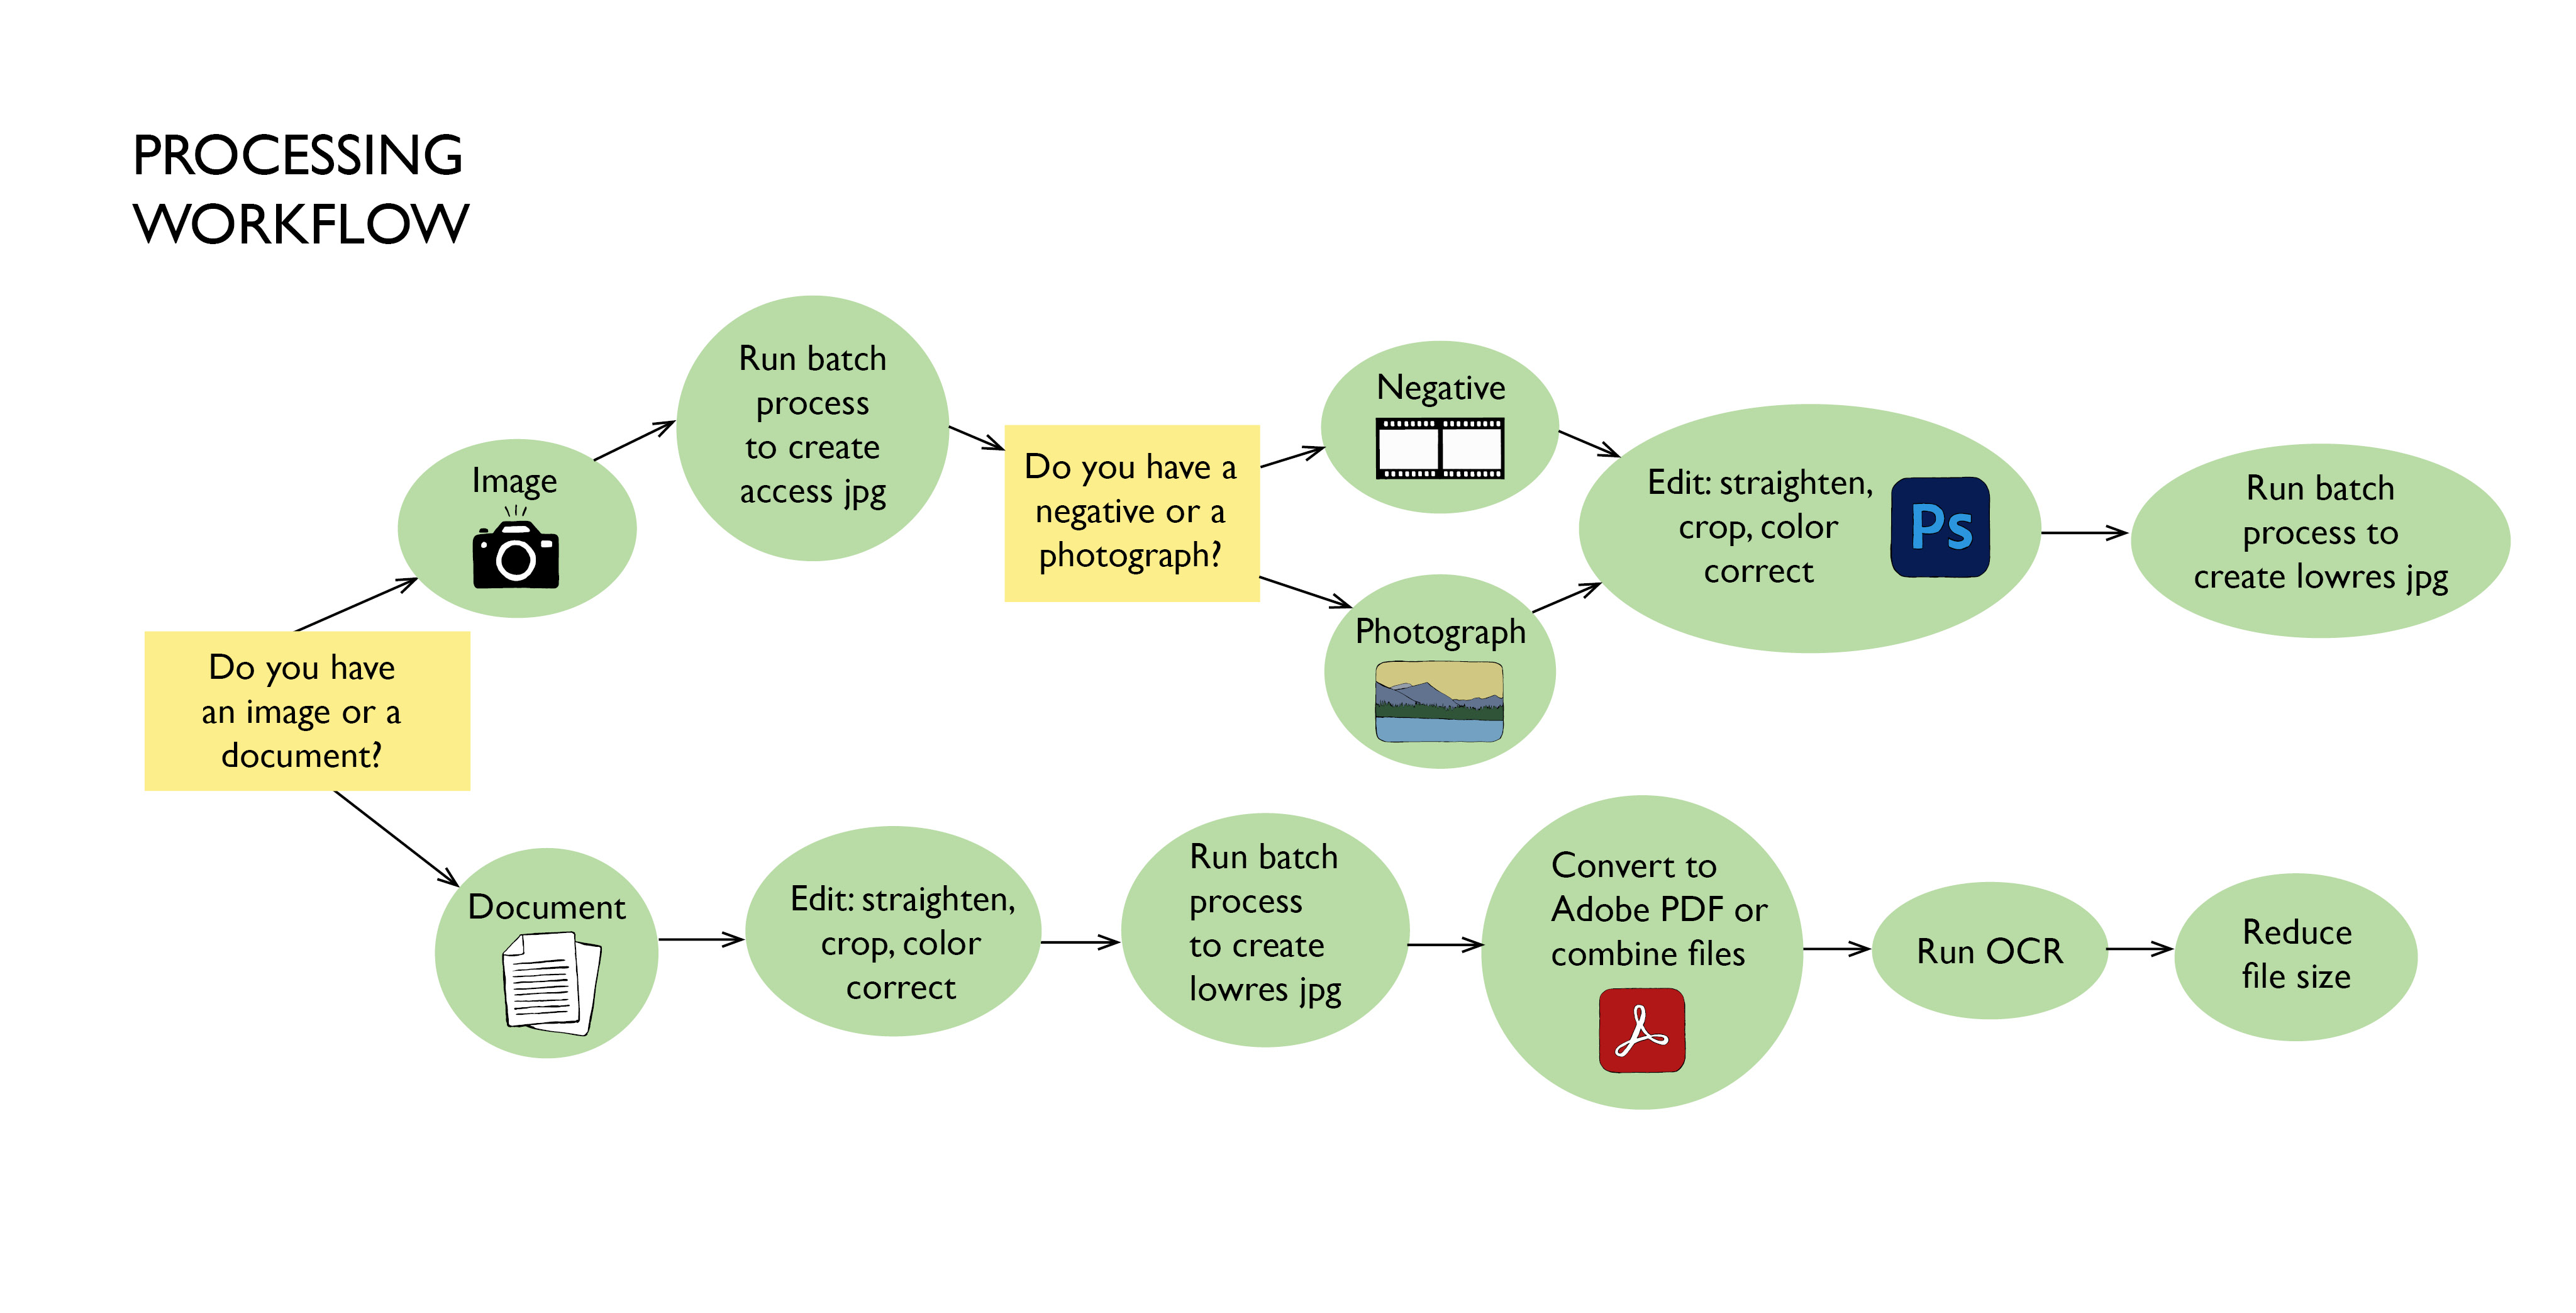 digital object processing flow chart in color with icons